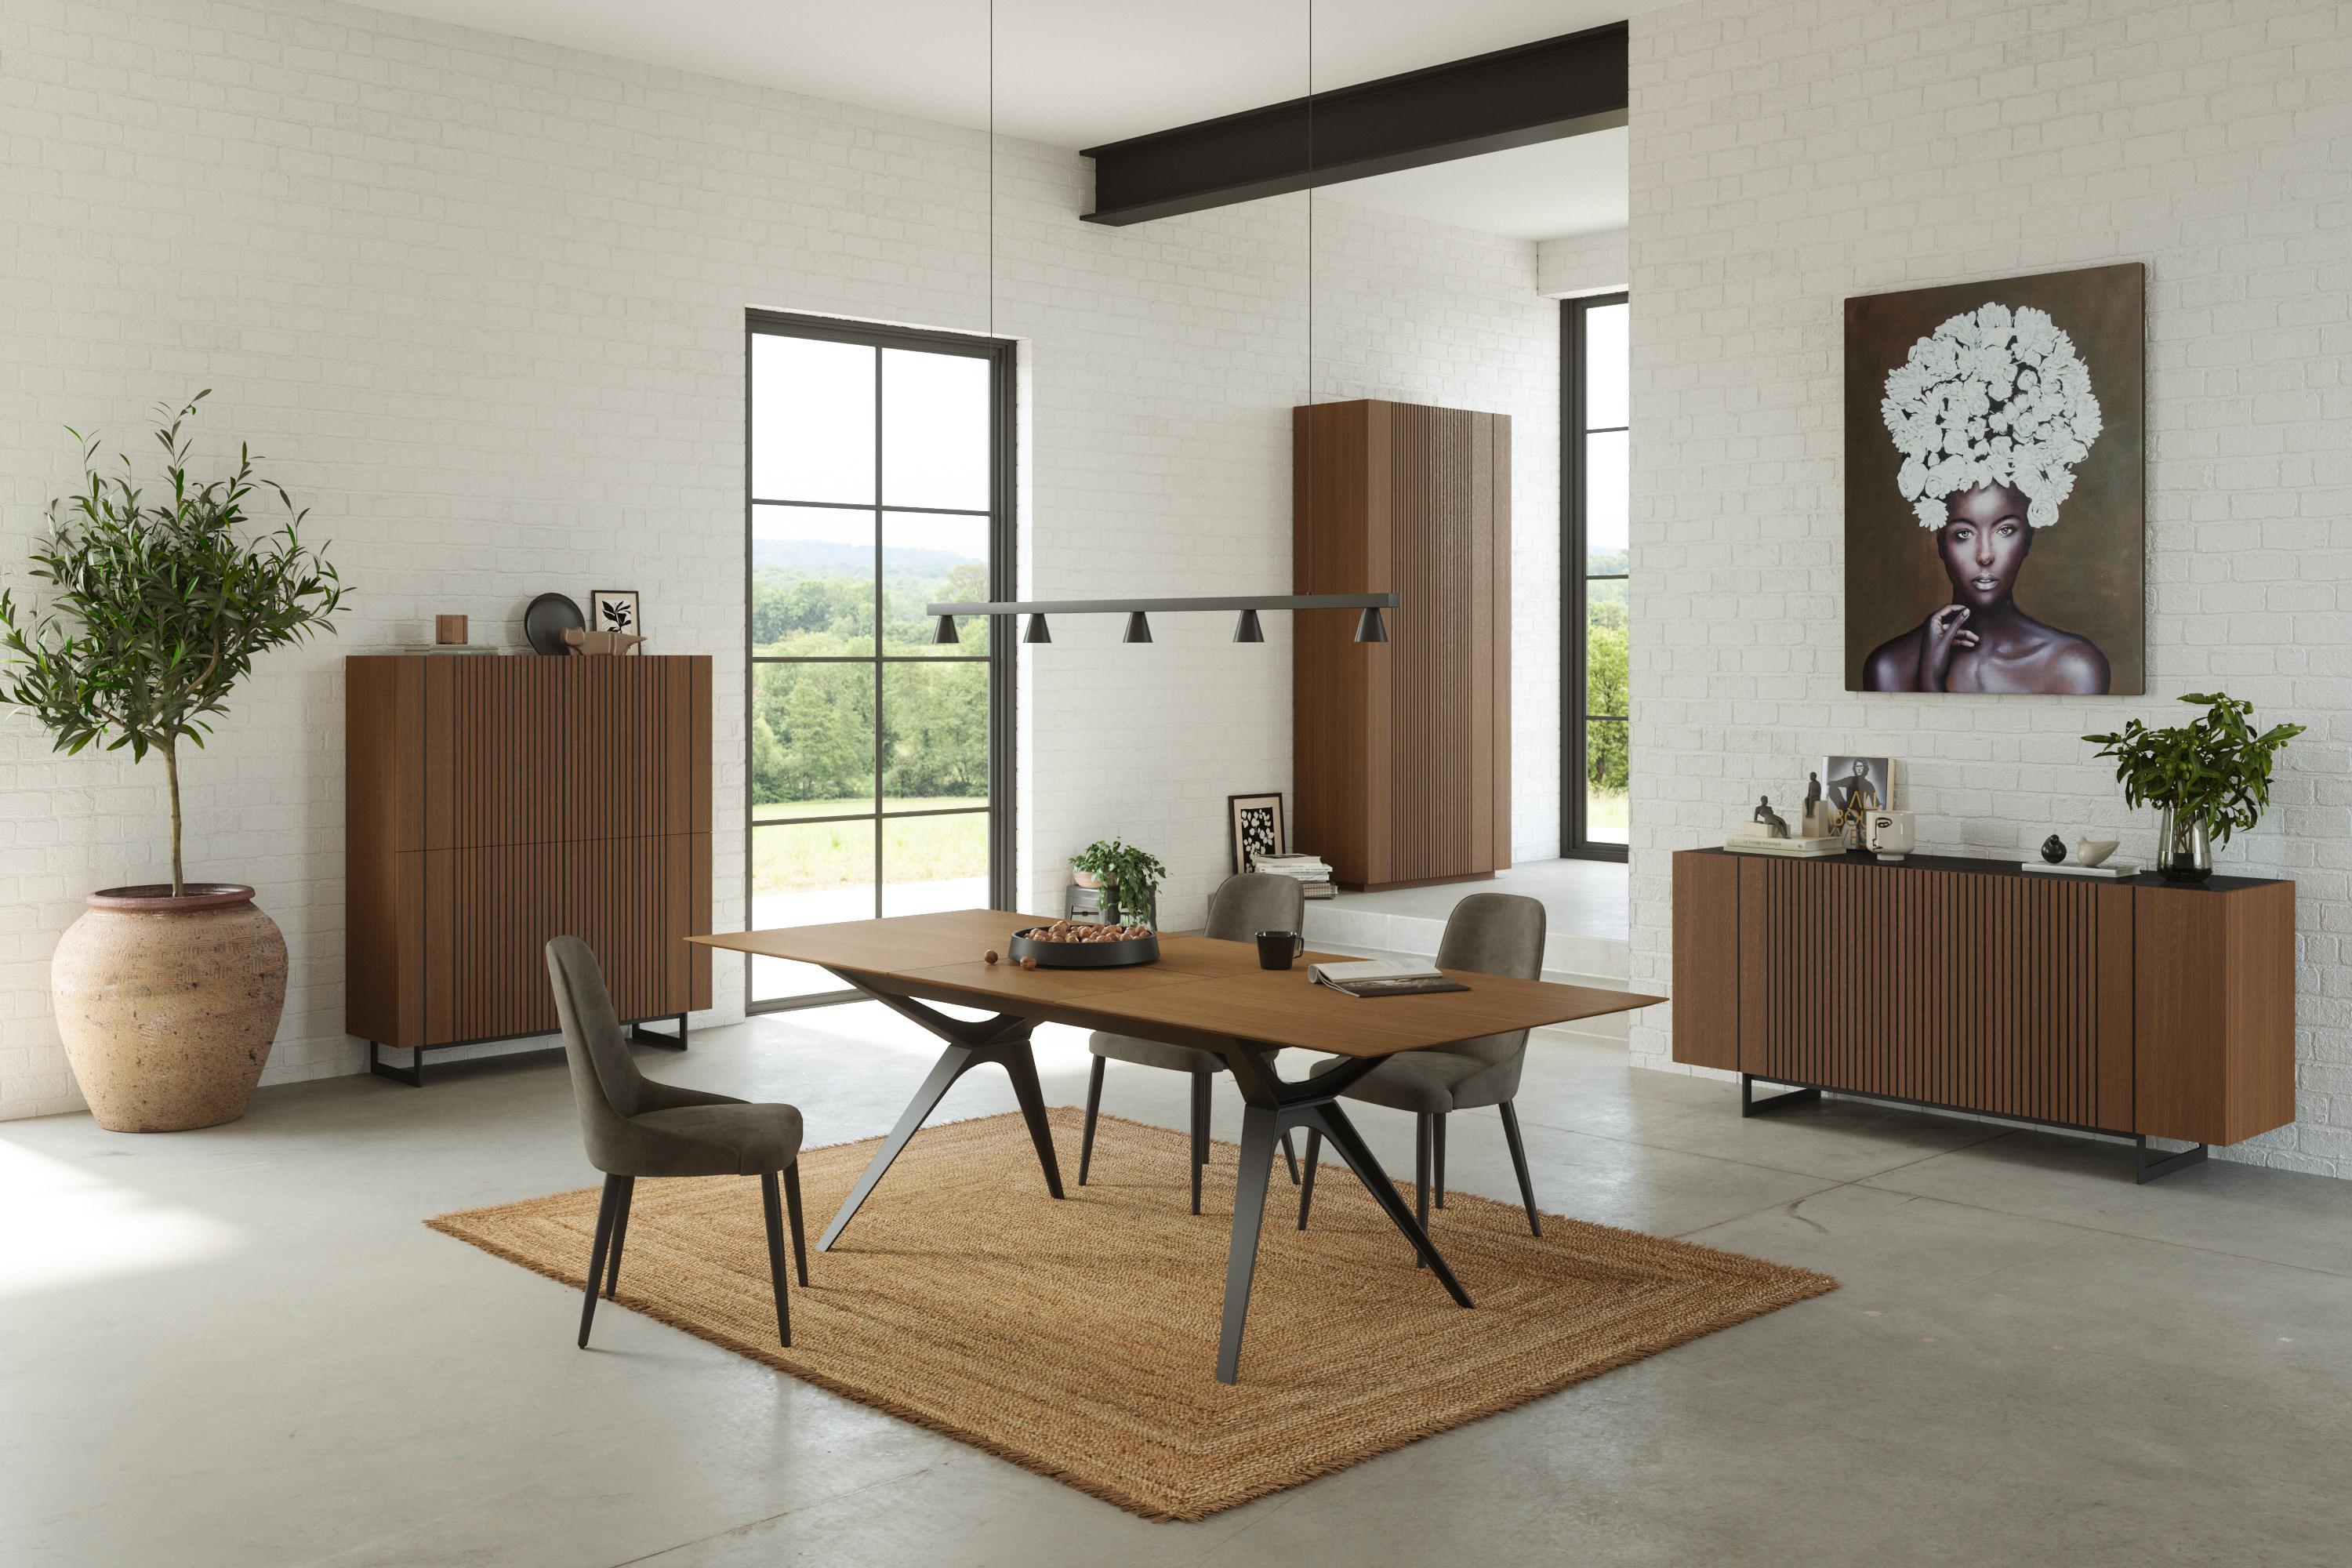 *Collection not sold in France, exclusive to Mobilier de France.*

The Piana collection is one of Cacio's bestsellers, with Scandinavian inspiration, this line is available in several shades of oak ranging from lighter to darker tones. For greater